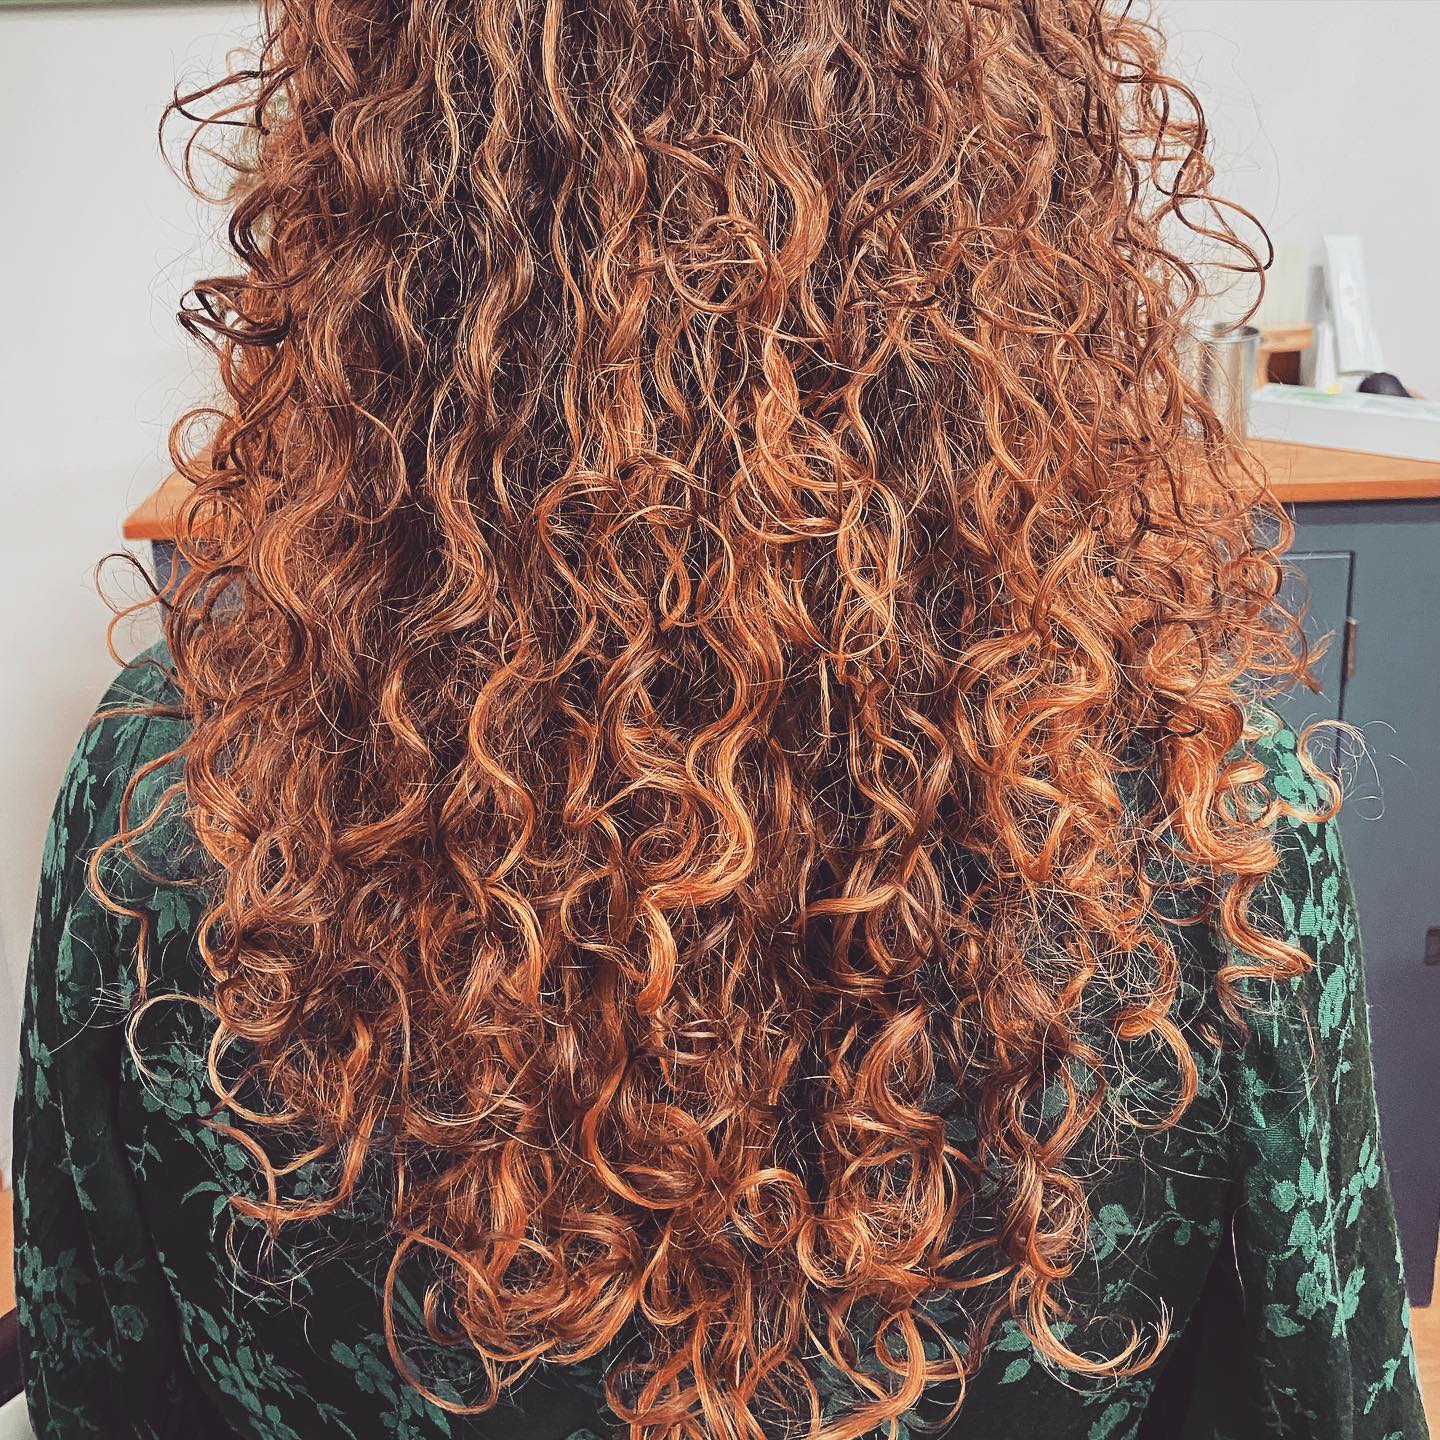 A photo of the back of a woman\x27s head. Her hair is ginger and very curly.